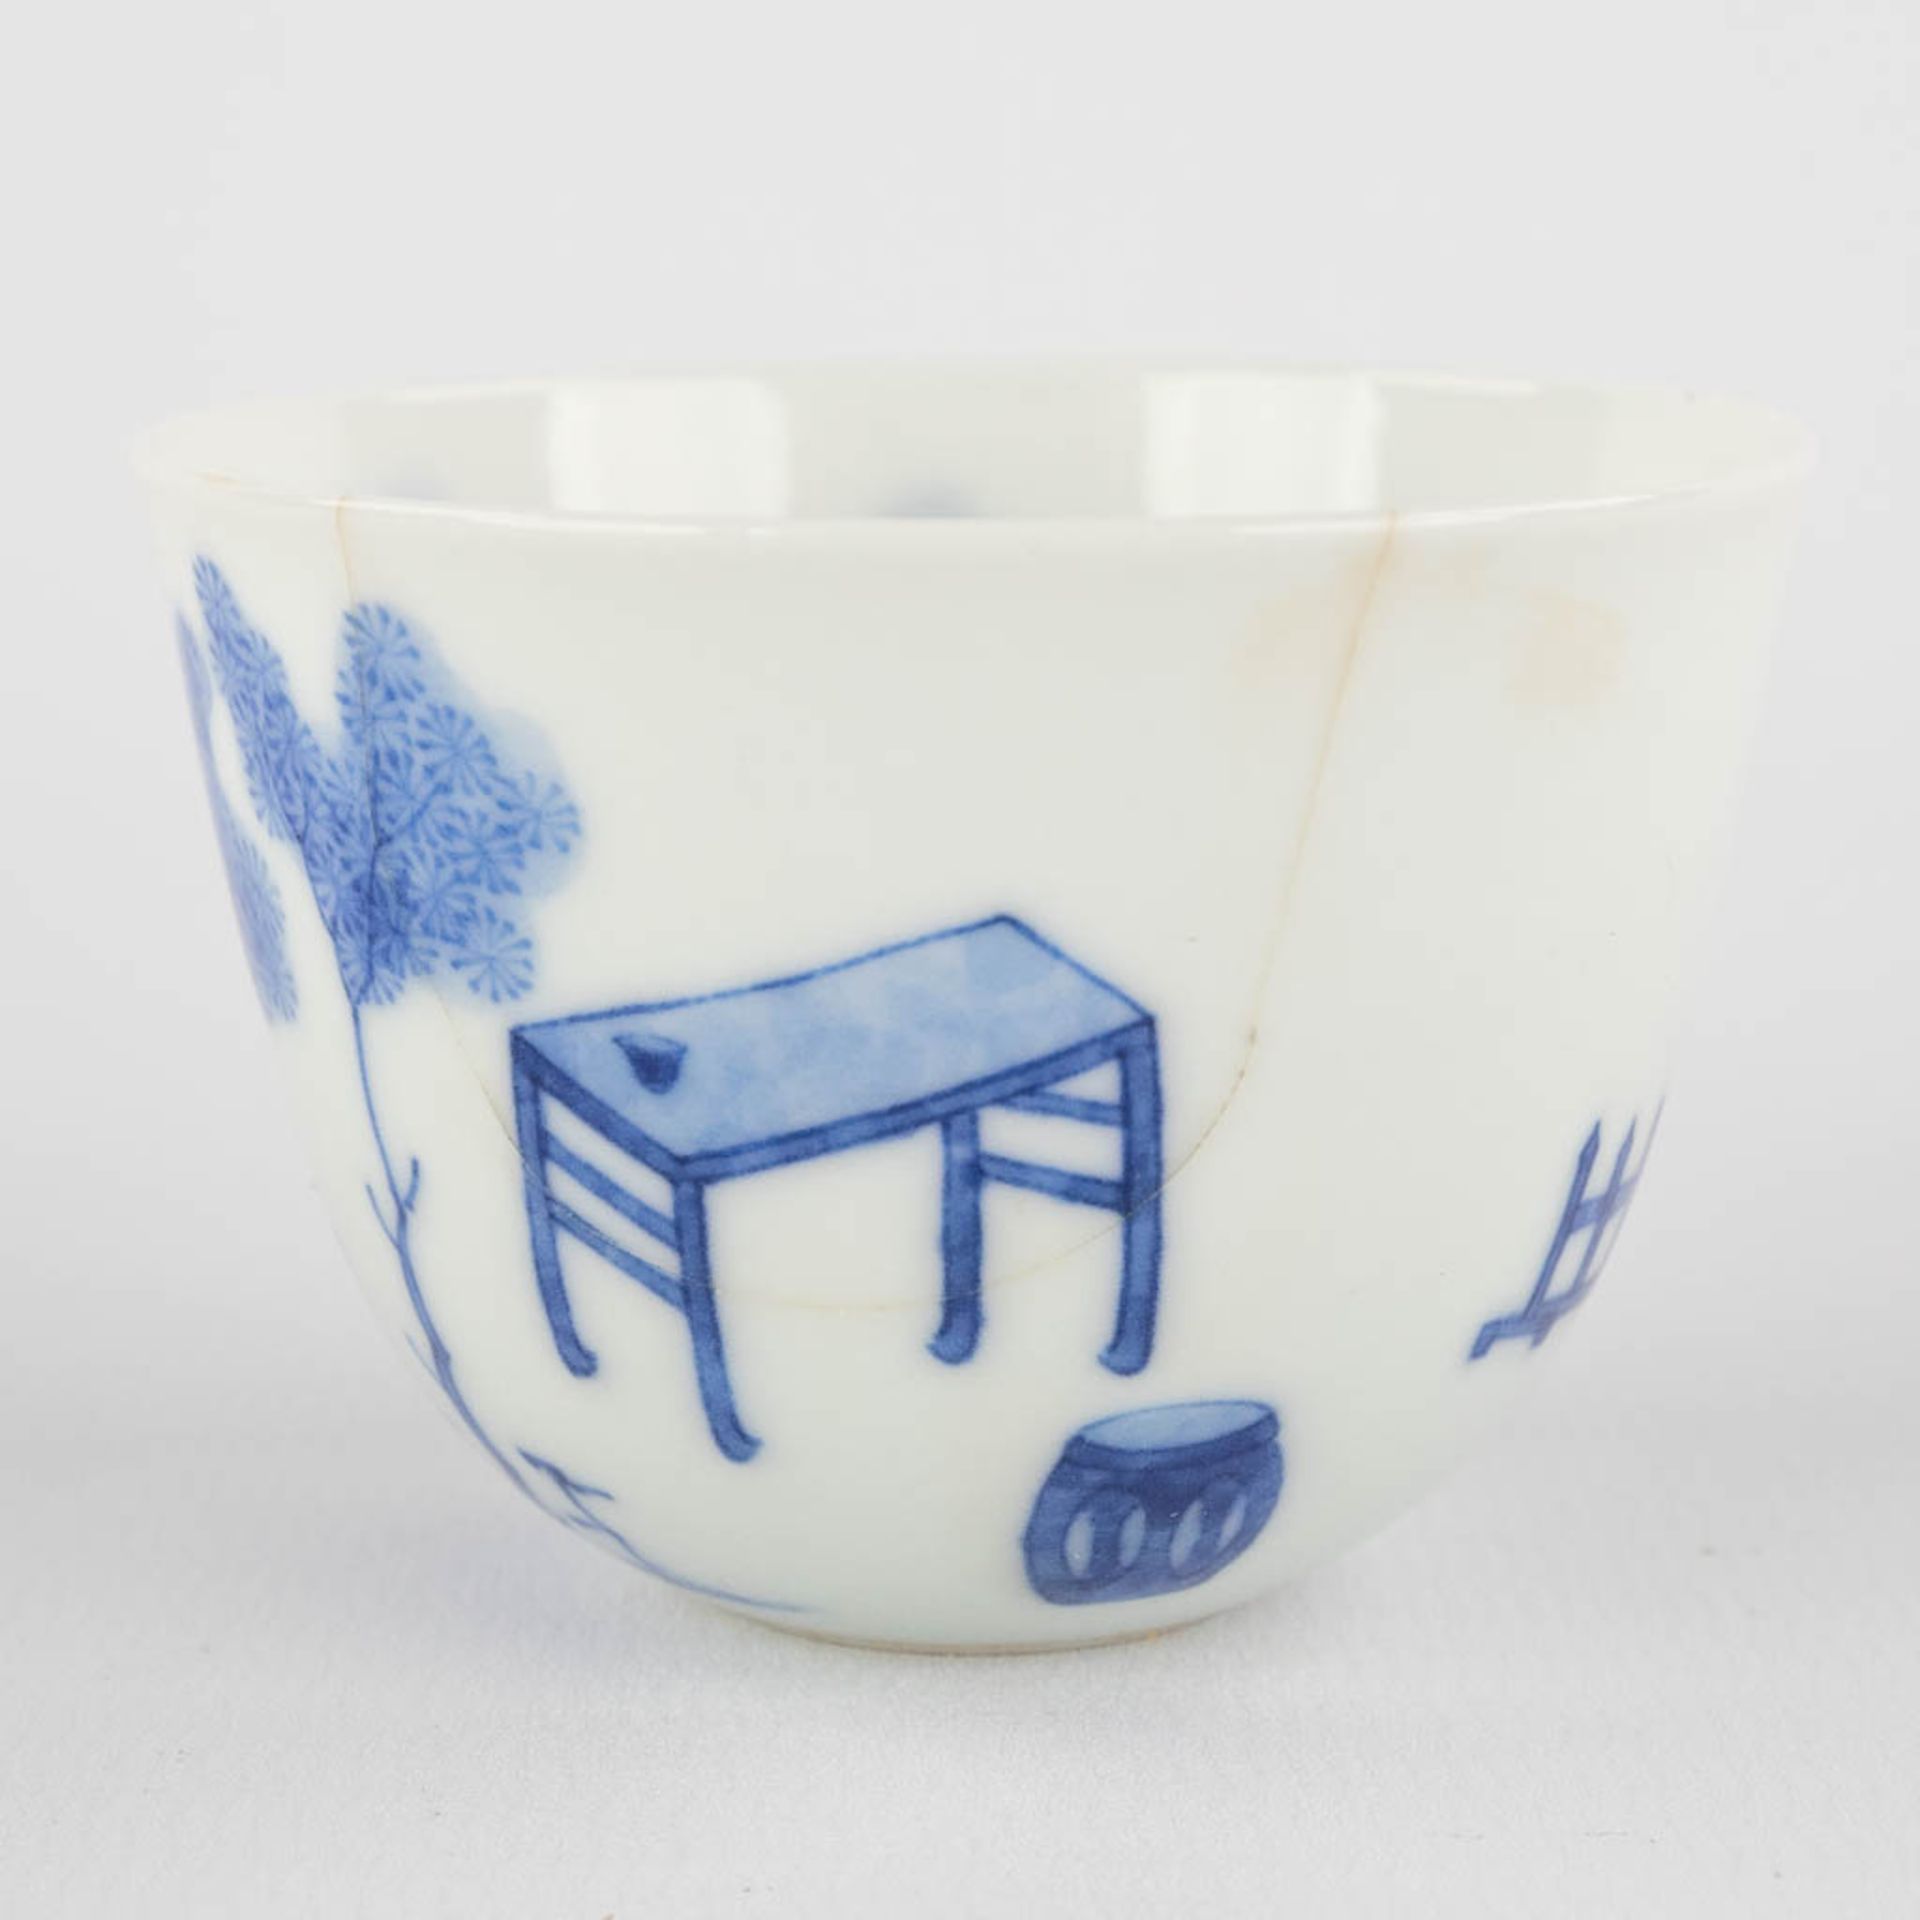 A small Chinese teacup with blue-white erotic scène, Chenghua mark, 19th/20th C. (H:4,5 x D:6,2 cm) - Image 5 of 11